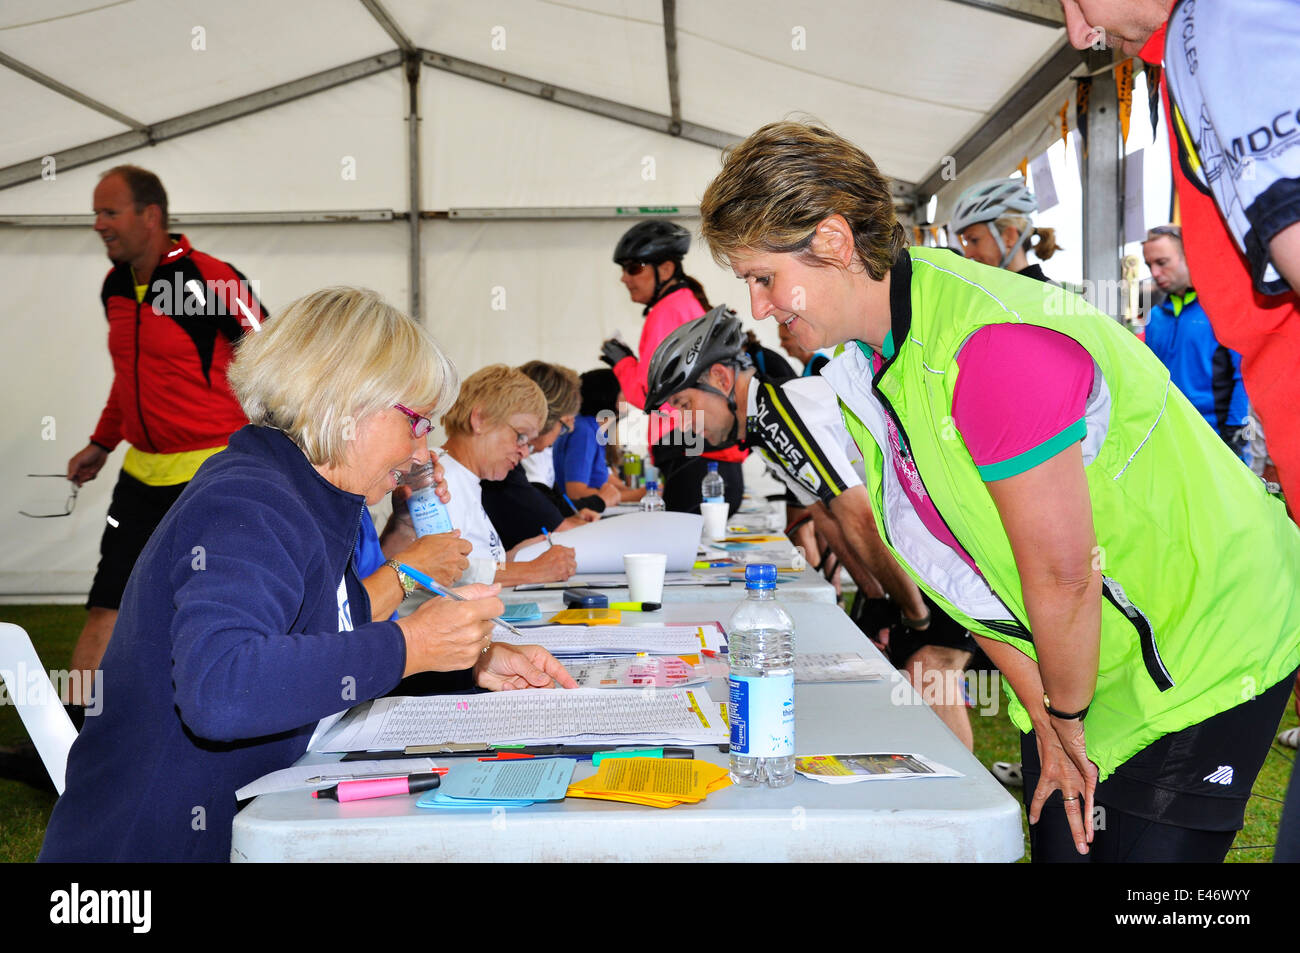 Cyclists registering to take part in a cycle sportive mass participation challenge ride. Stock Photo